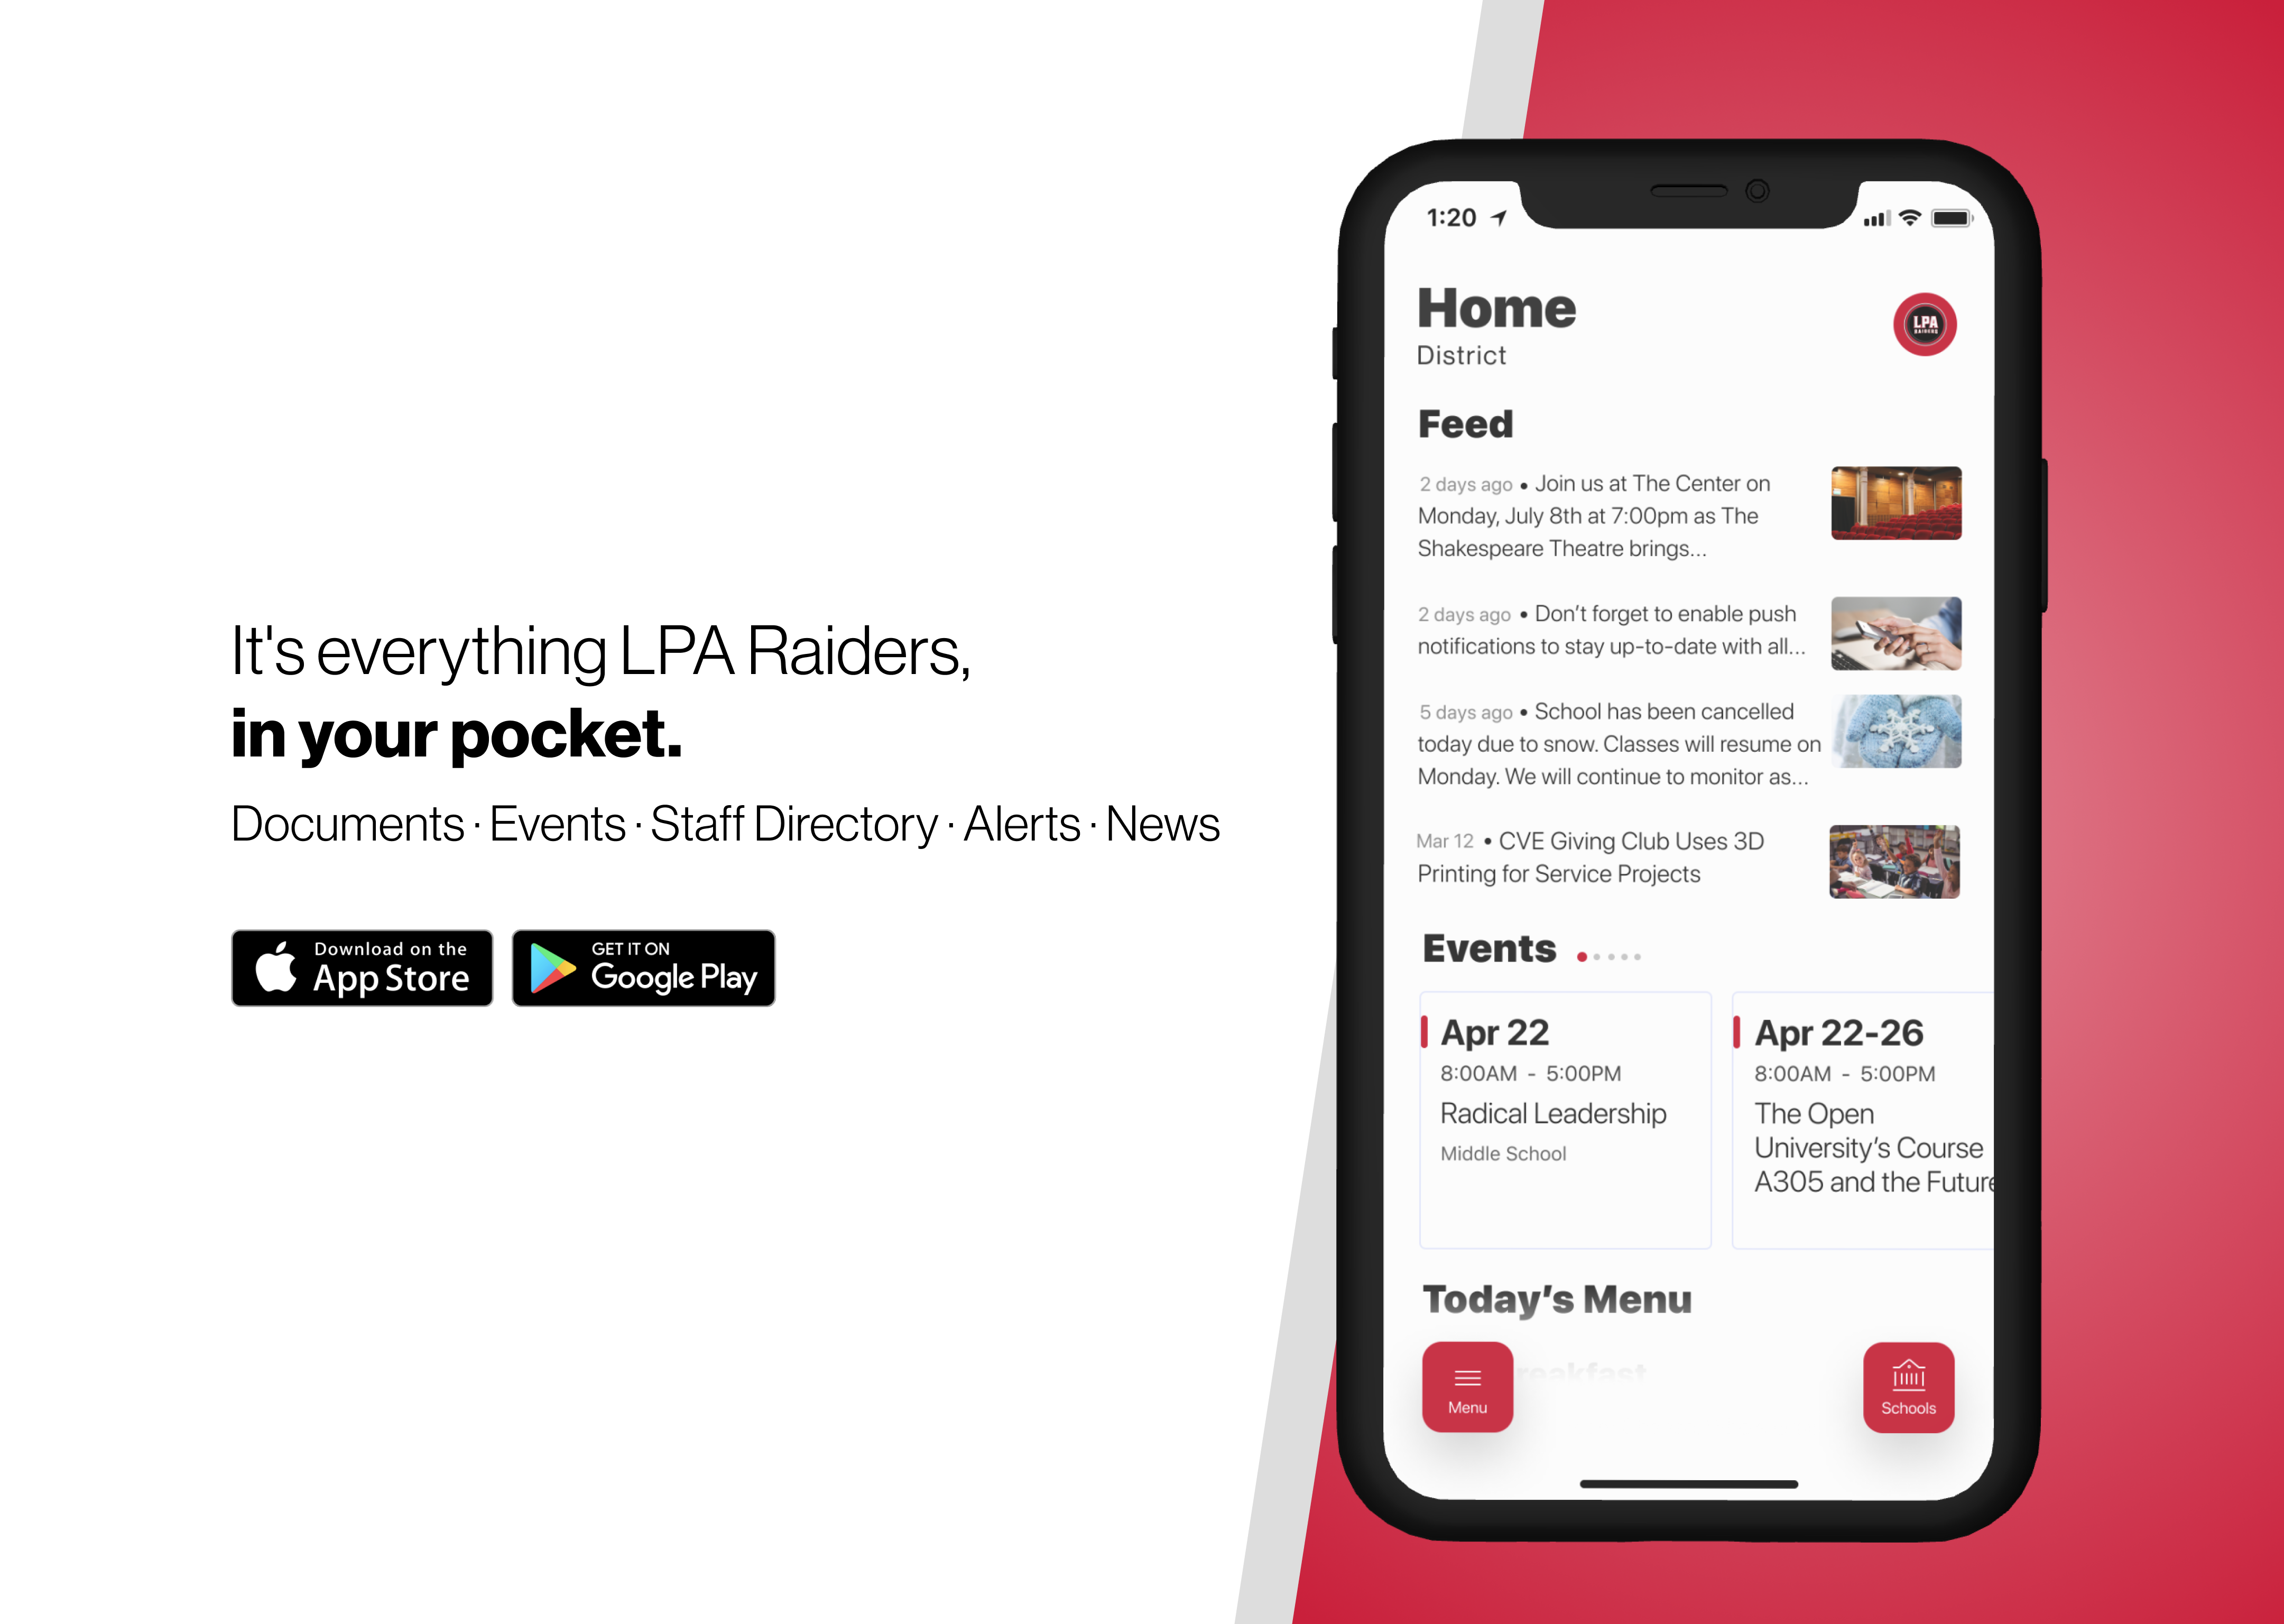 Everything LPA, in your pocket. Documents, Events, Staff, News, Alerts - Download on Google Play and App Stores